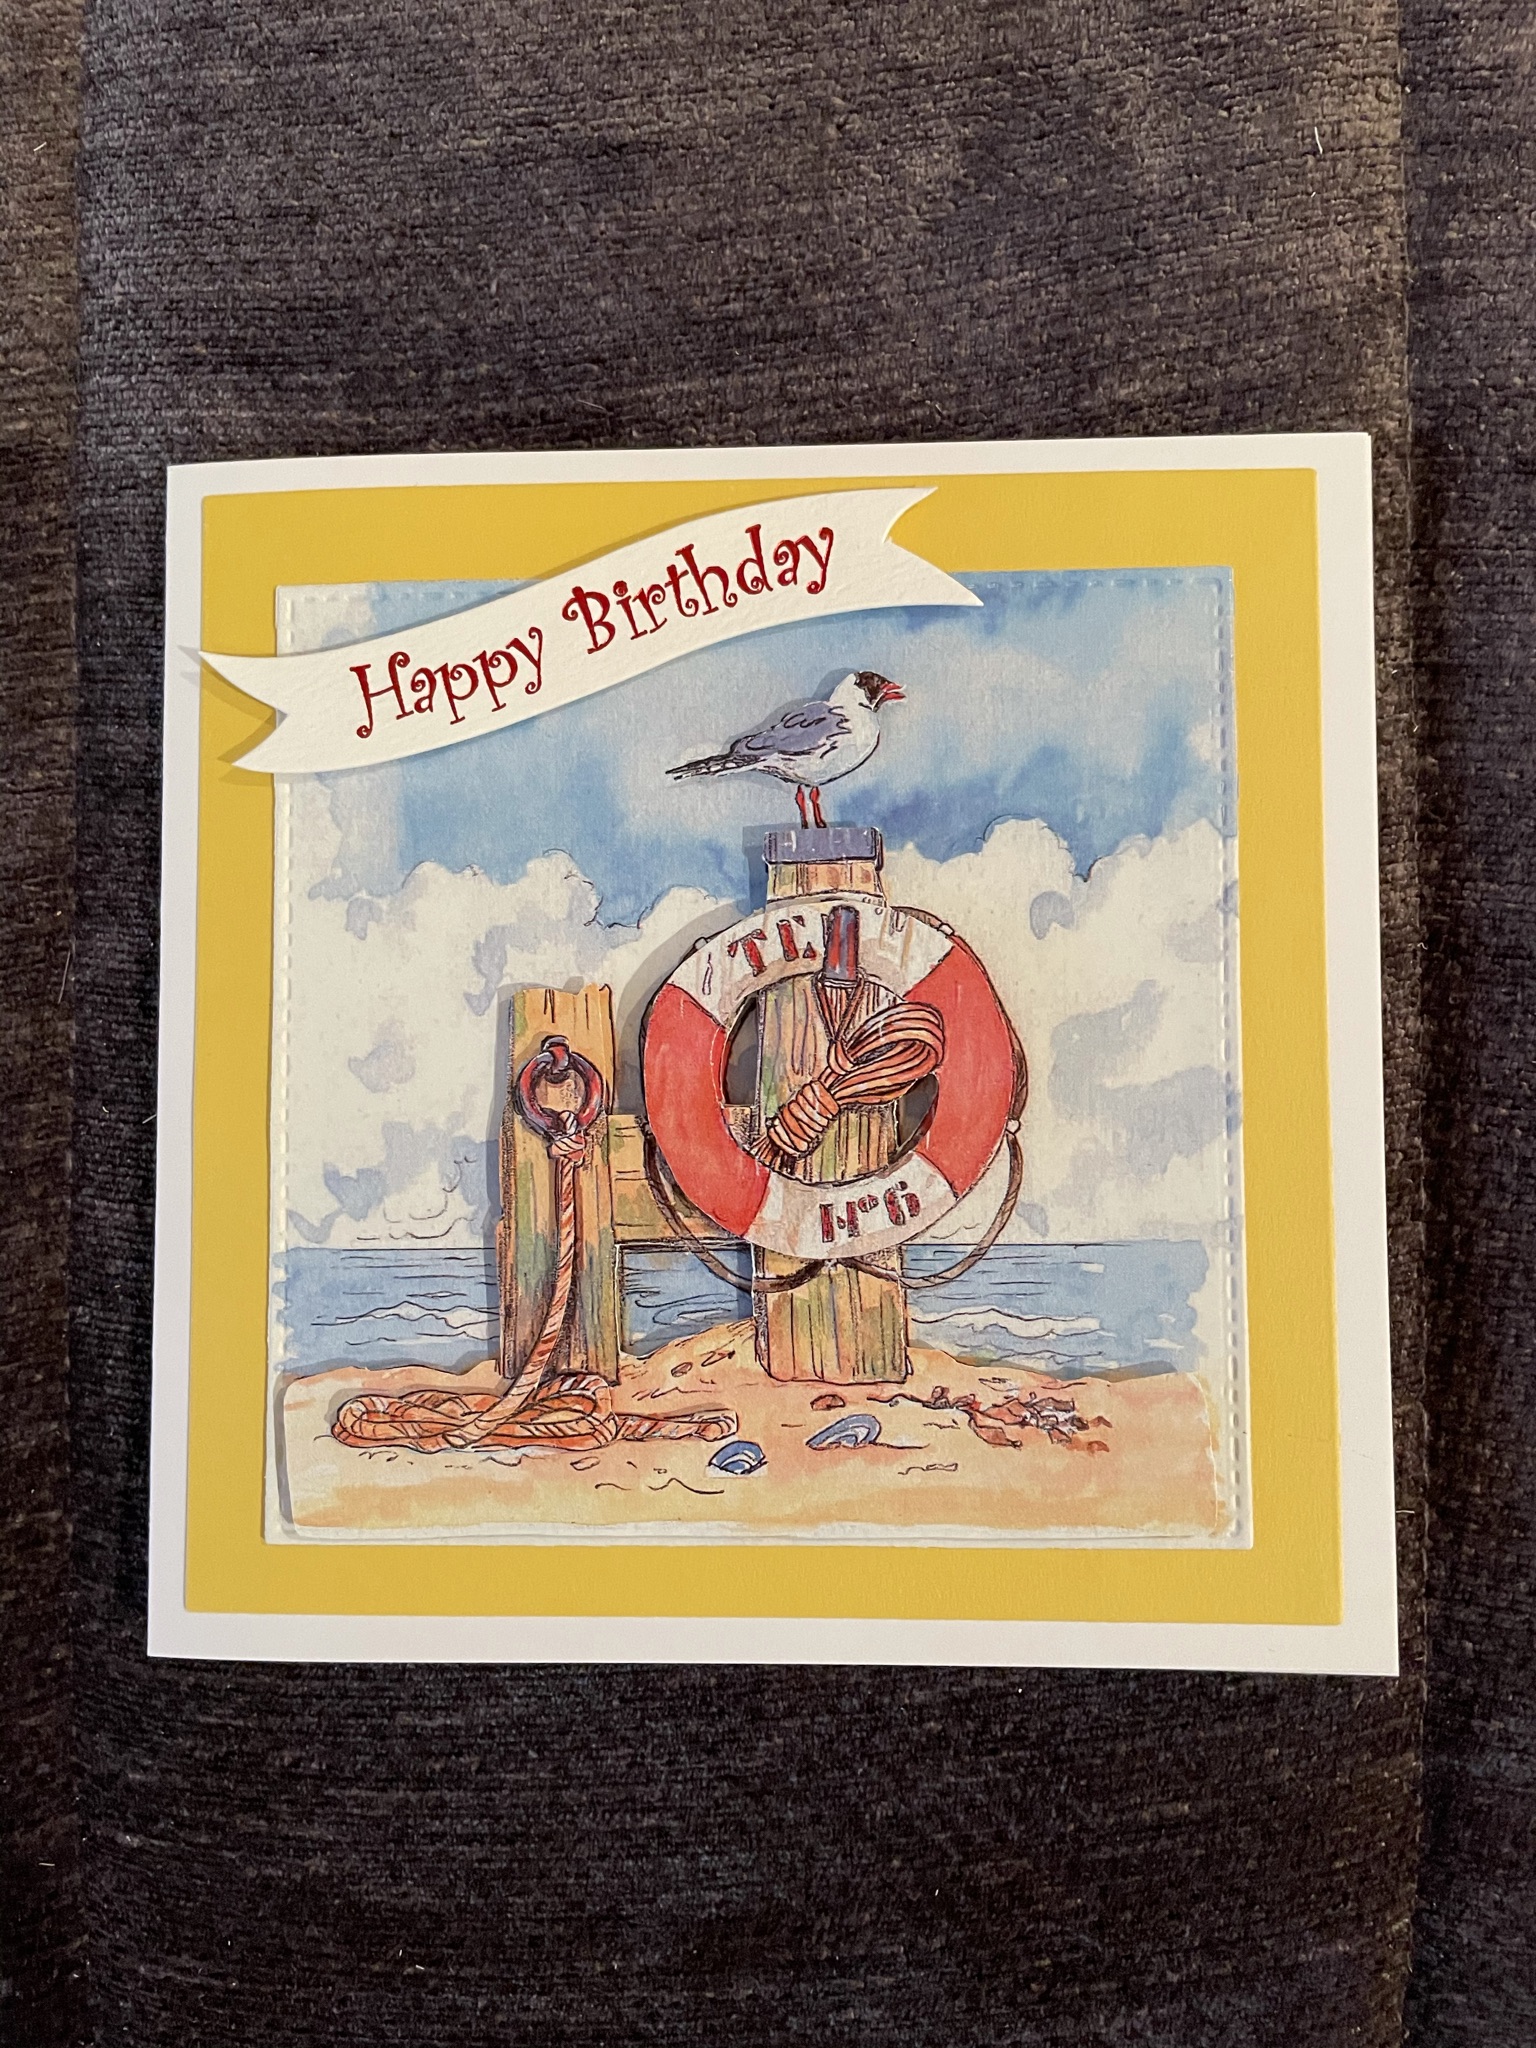 3D Handcrafted “Lifebuoy” themed Birthday Card | Ewe-nique handcrafted ...